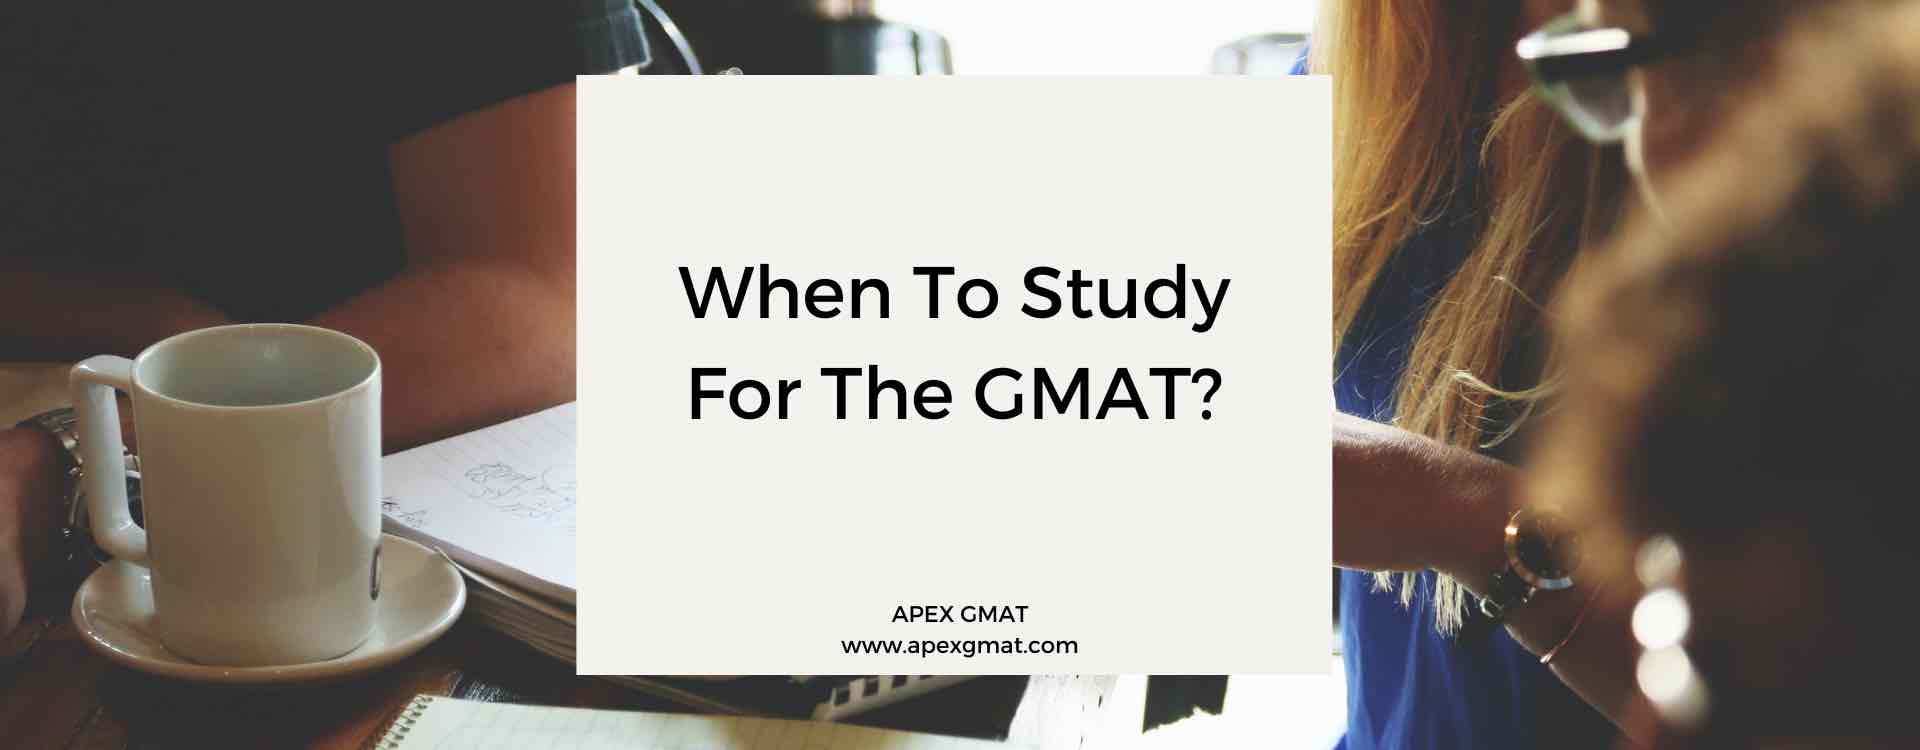 When To Study For The GMAT?